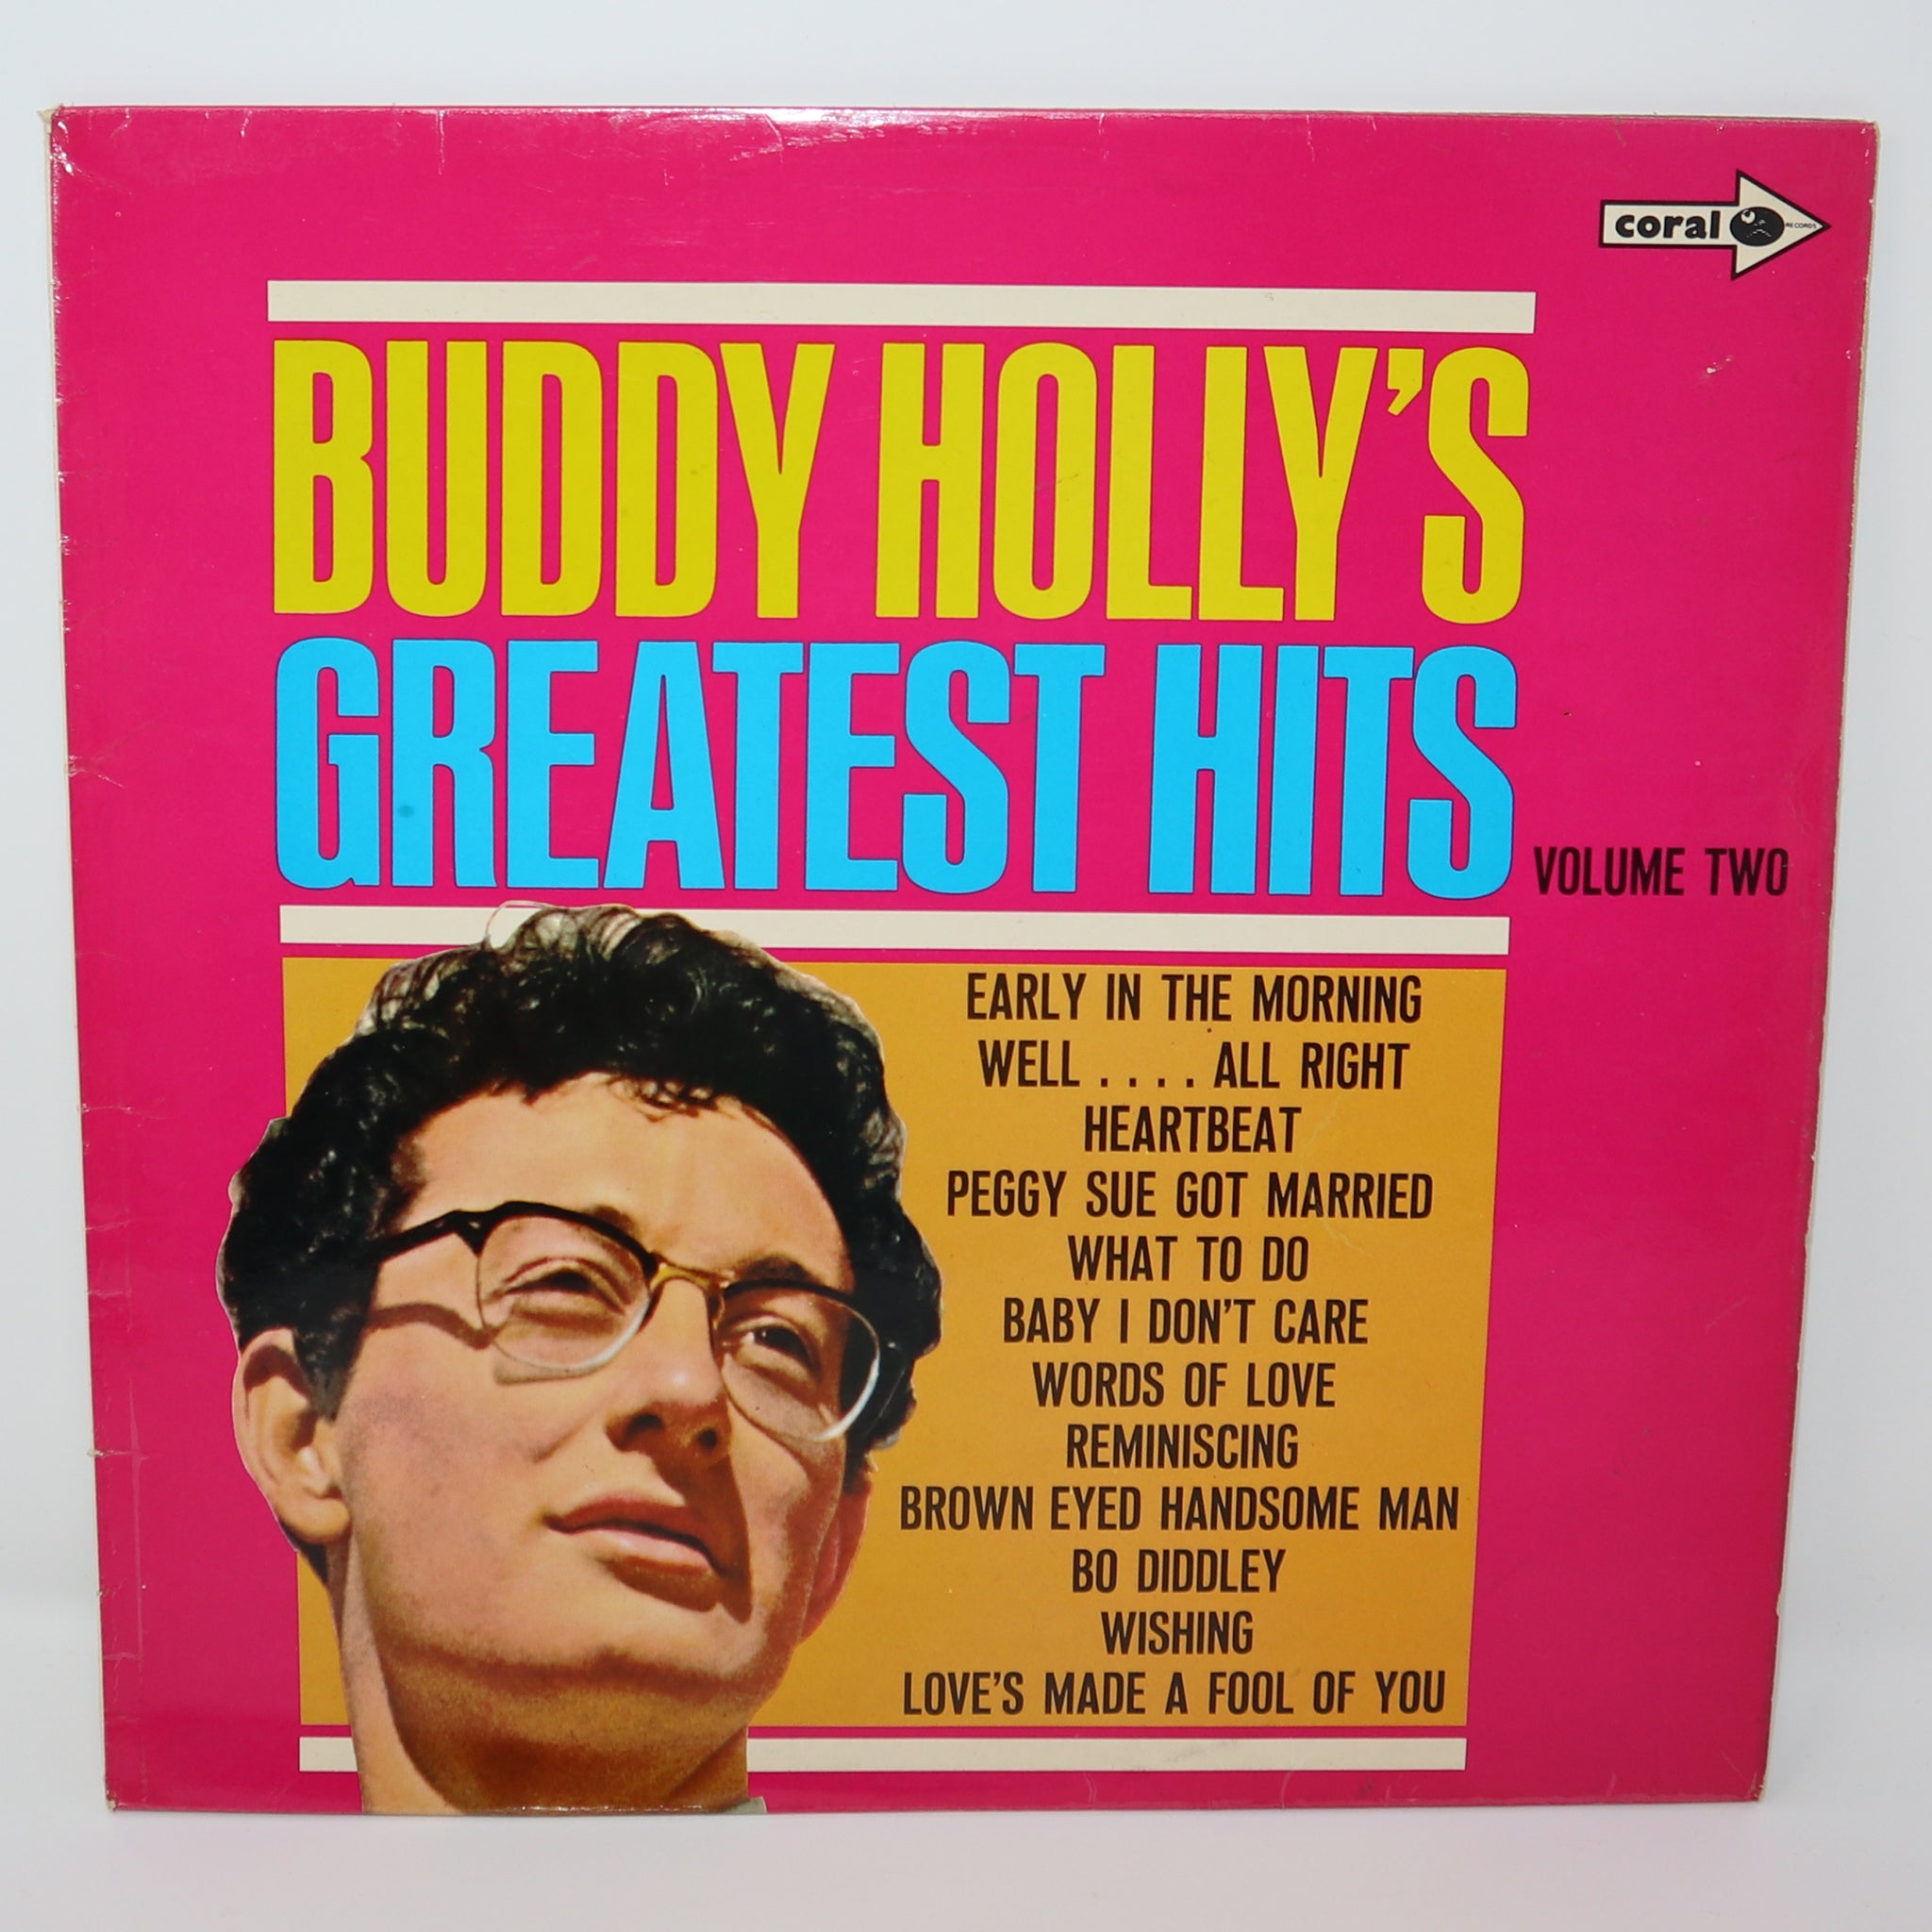 Vintage 1970 70s Coral MCA Records Buddy Holly's Greatest Hits Volume Two 2 Compilation LP Album Vinyl Record Mono